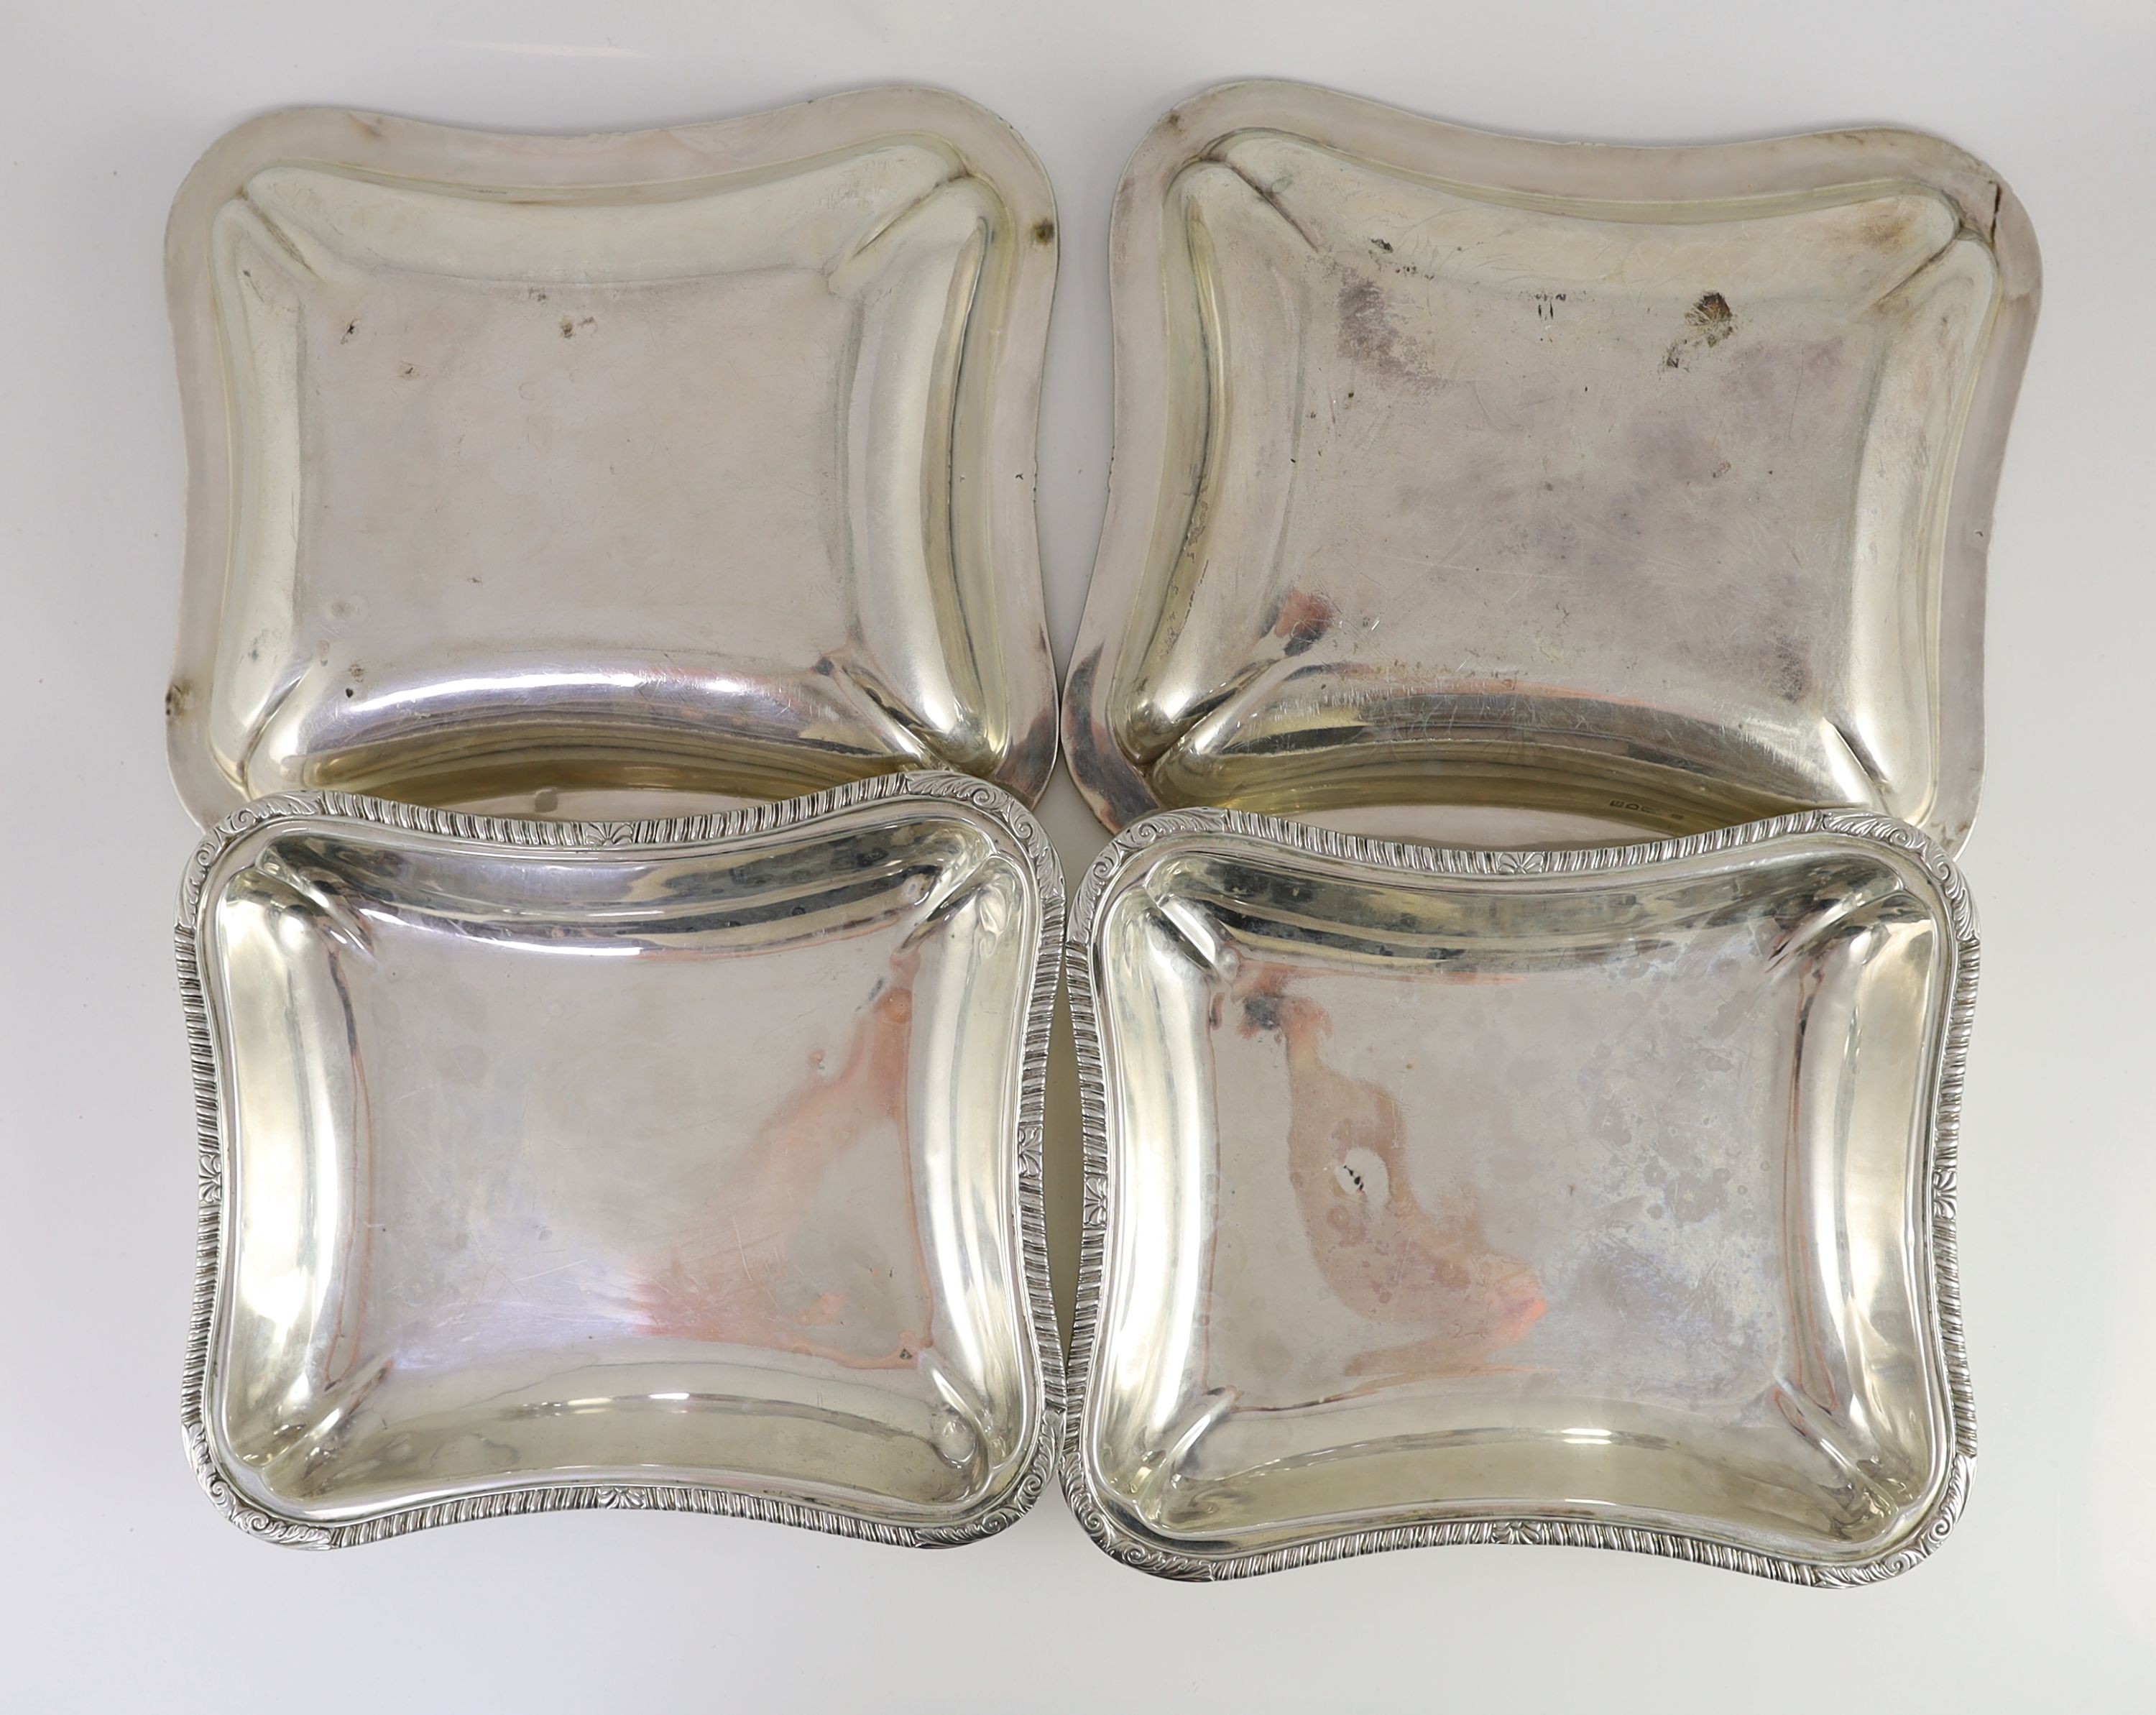 A pair of Edwardian silver tureens and cover with handles, by Daniel & John Welby